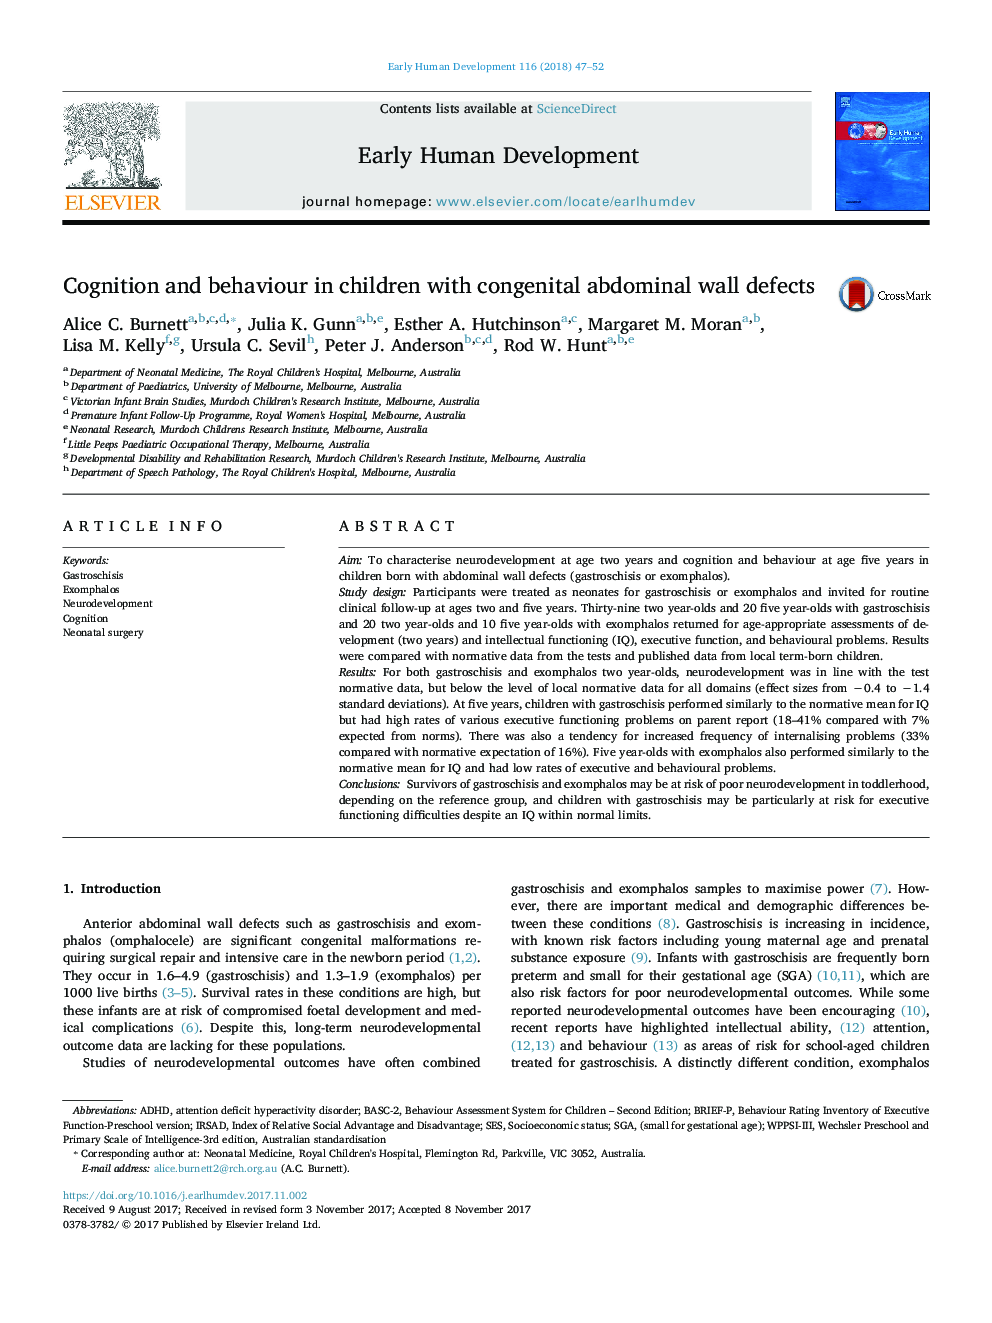 Cognition and behaviour in children with congenital abdominal wall defects